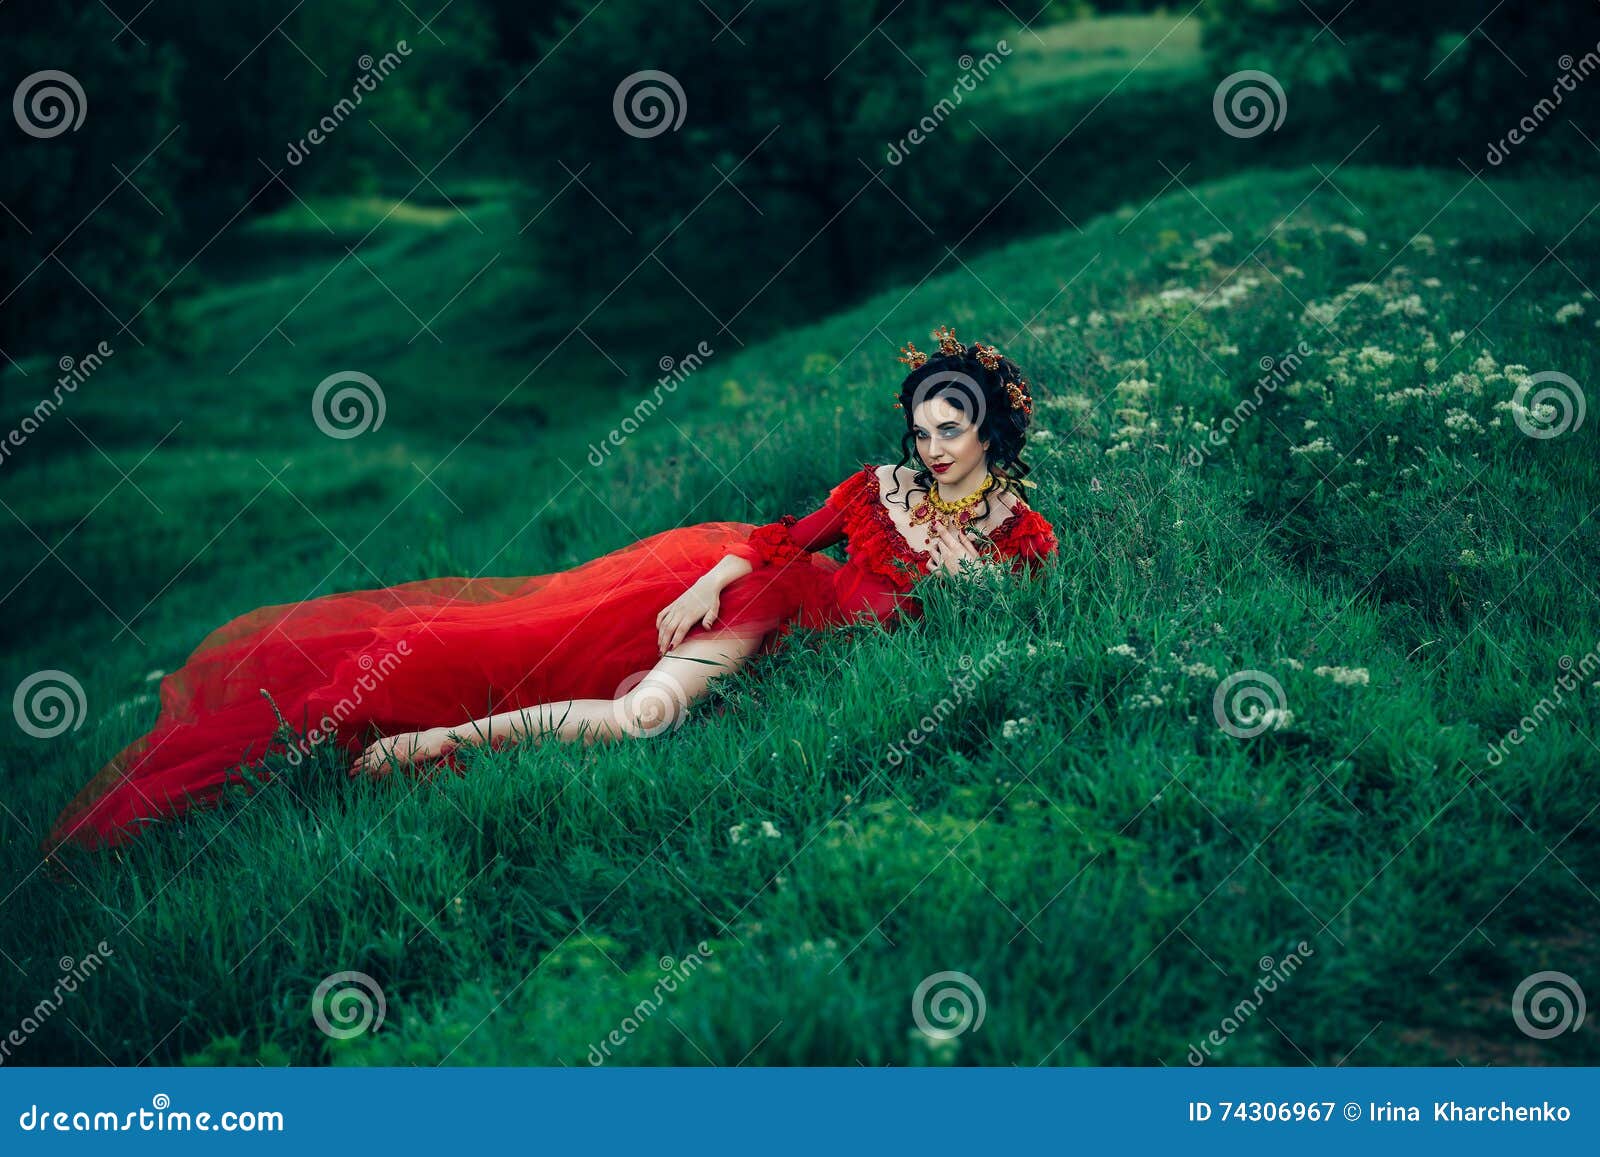 countess in a long red dress